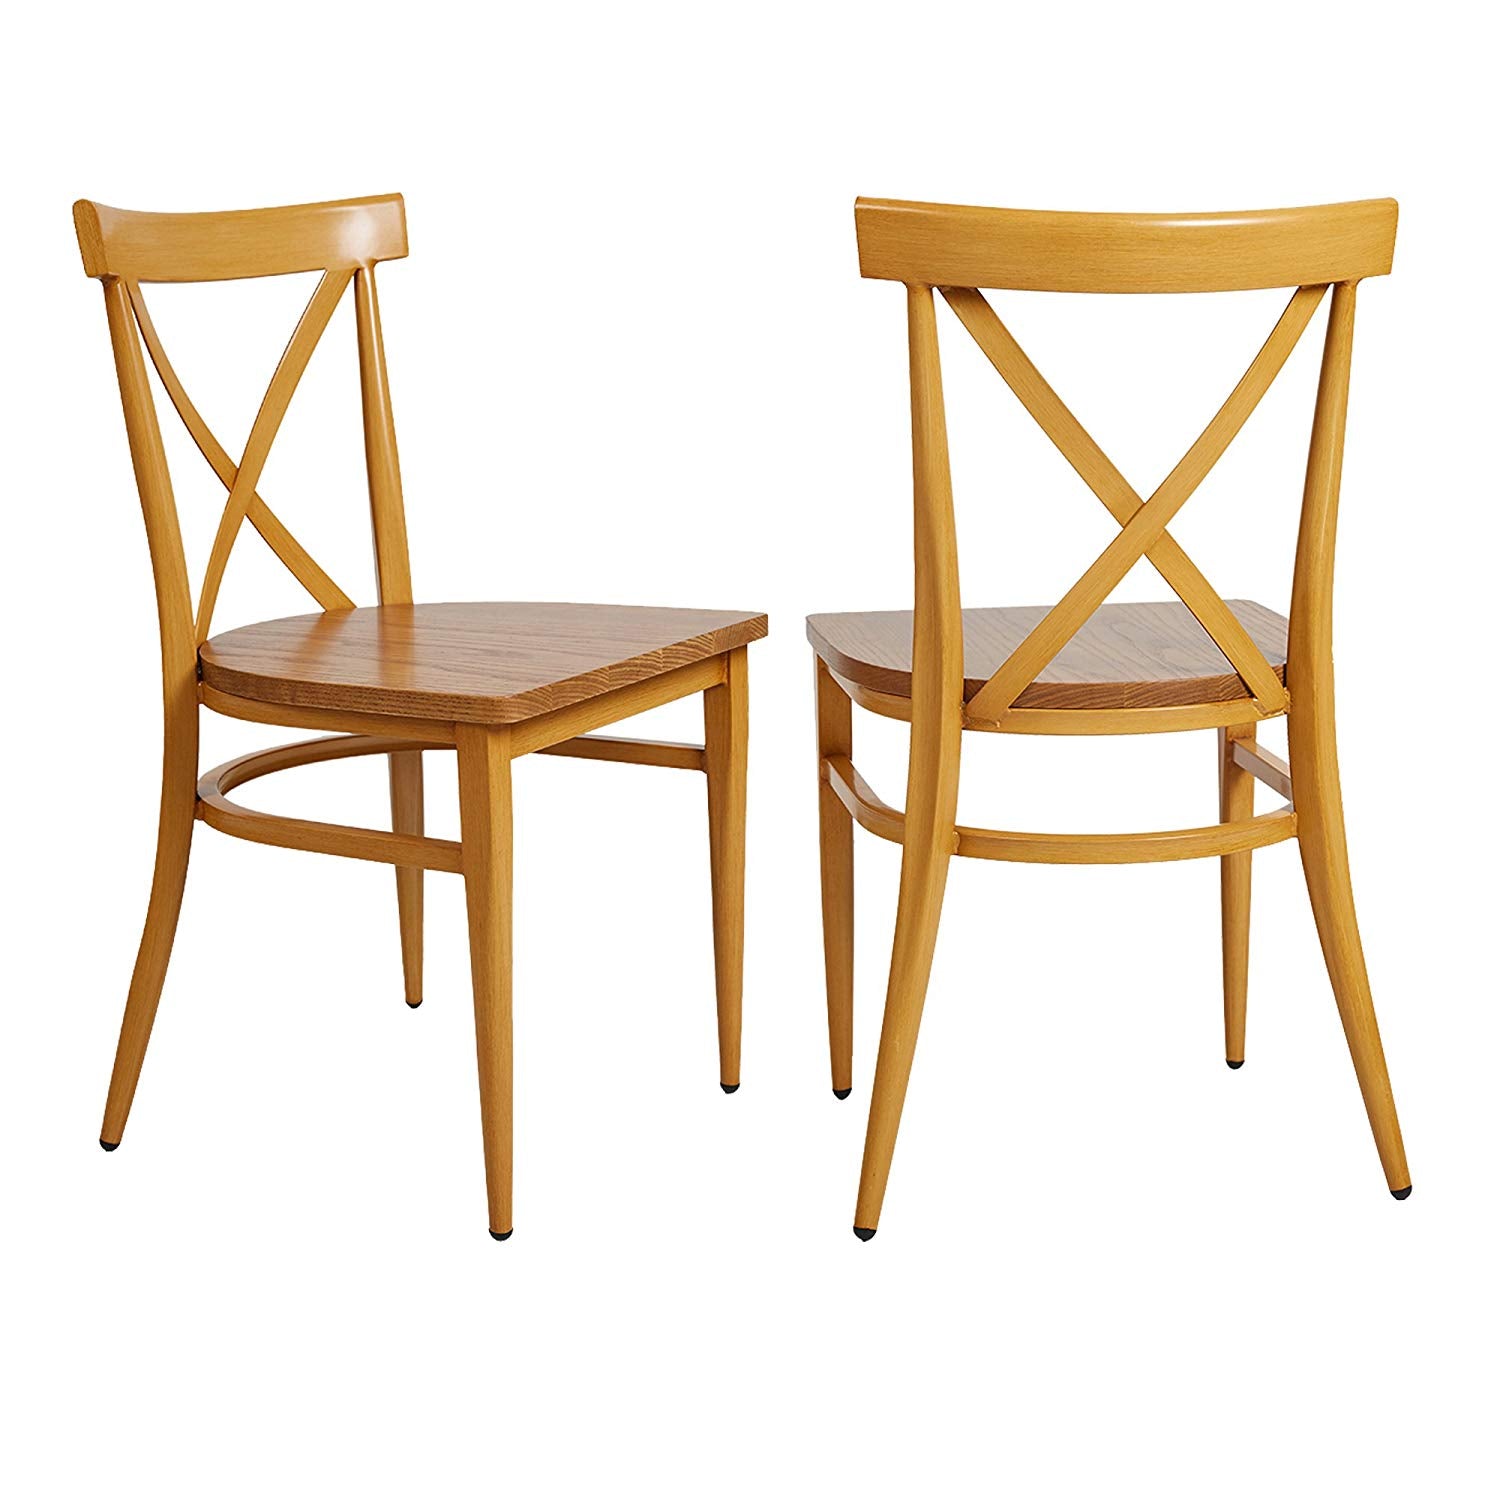 Bosonshop Stackable Side Chairs with Solid Wood Seat&Sturdy Metal Legs, Yellow